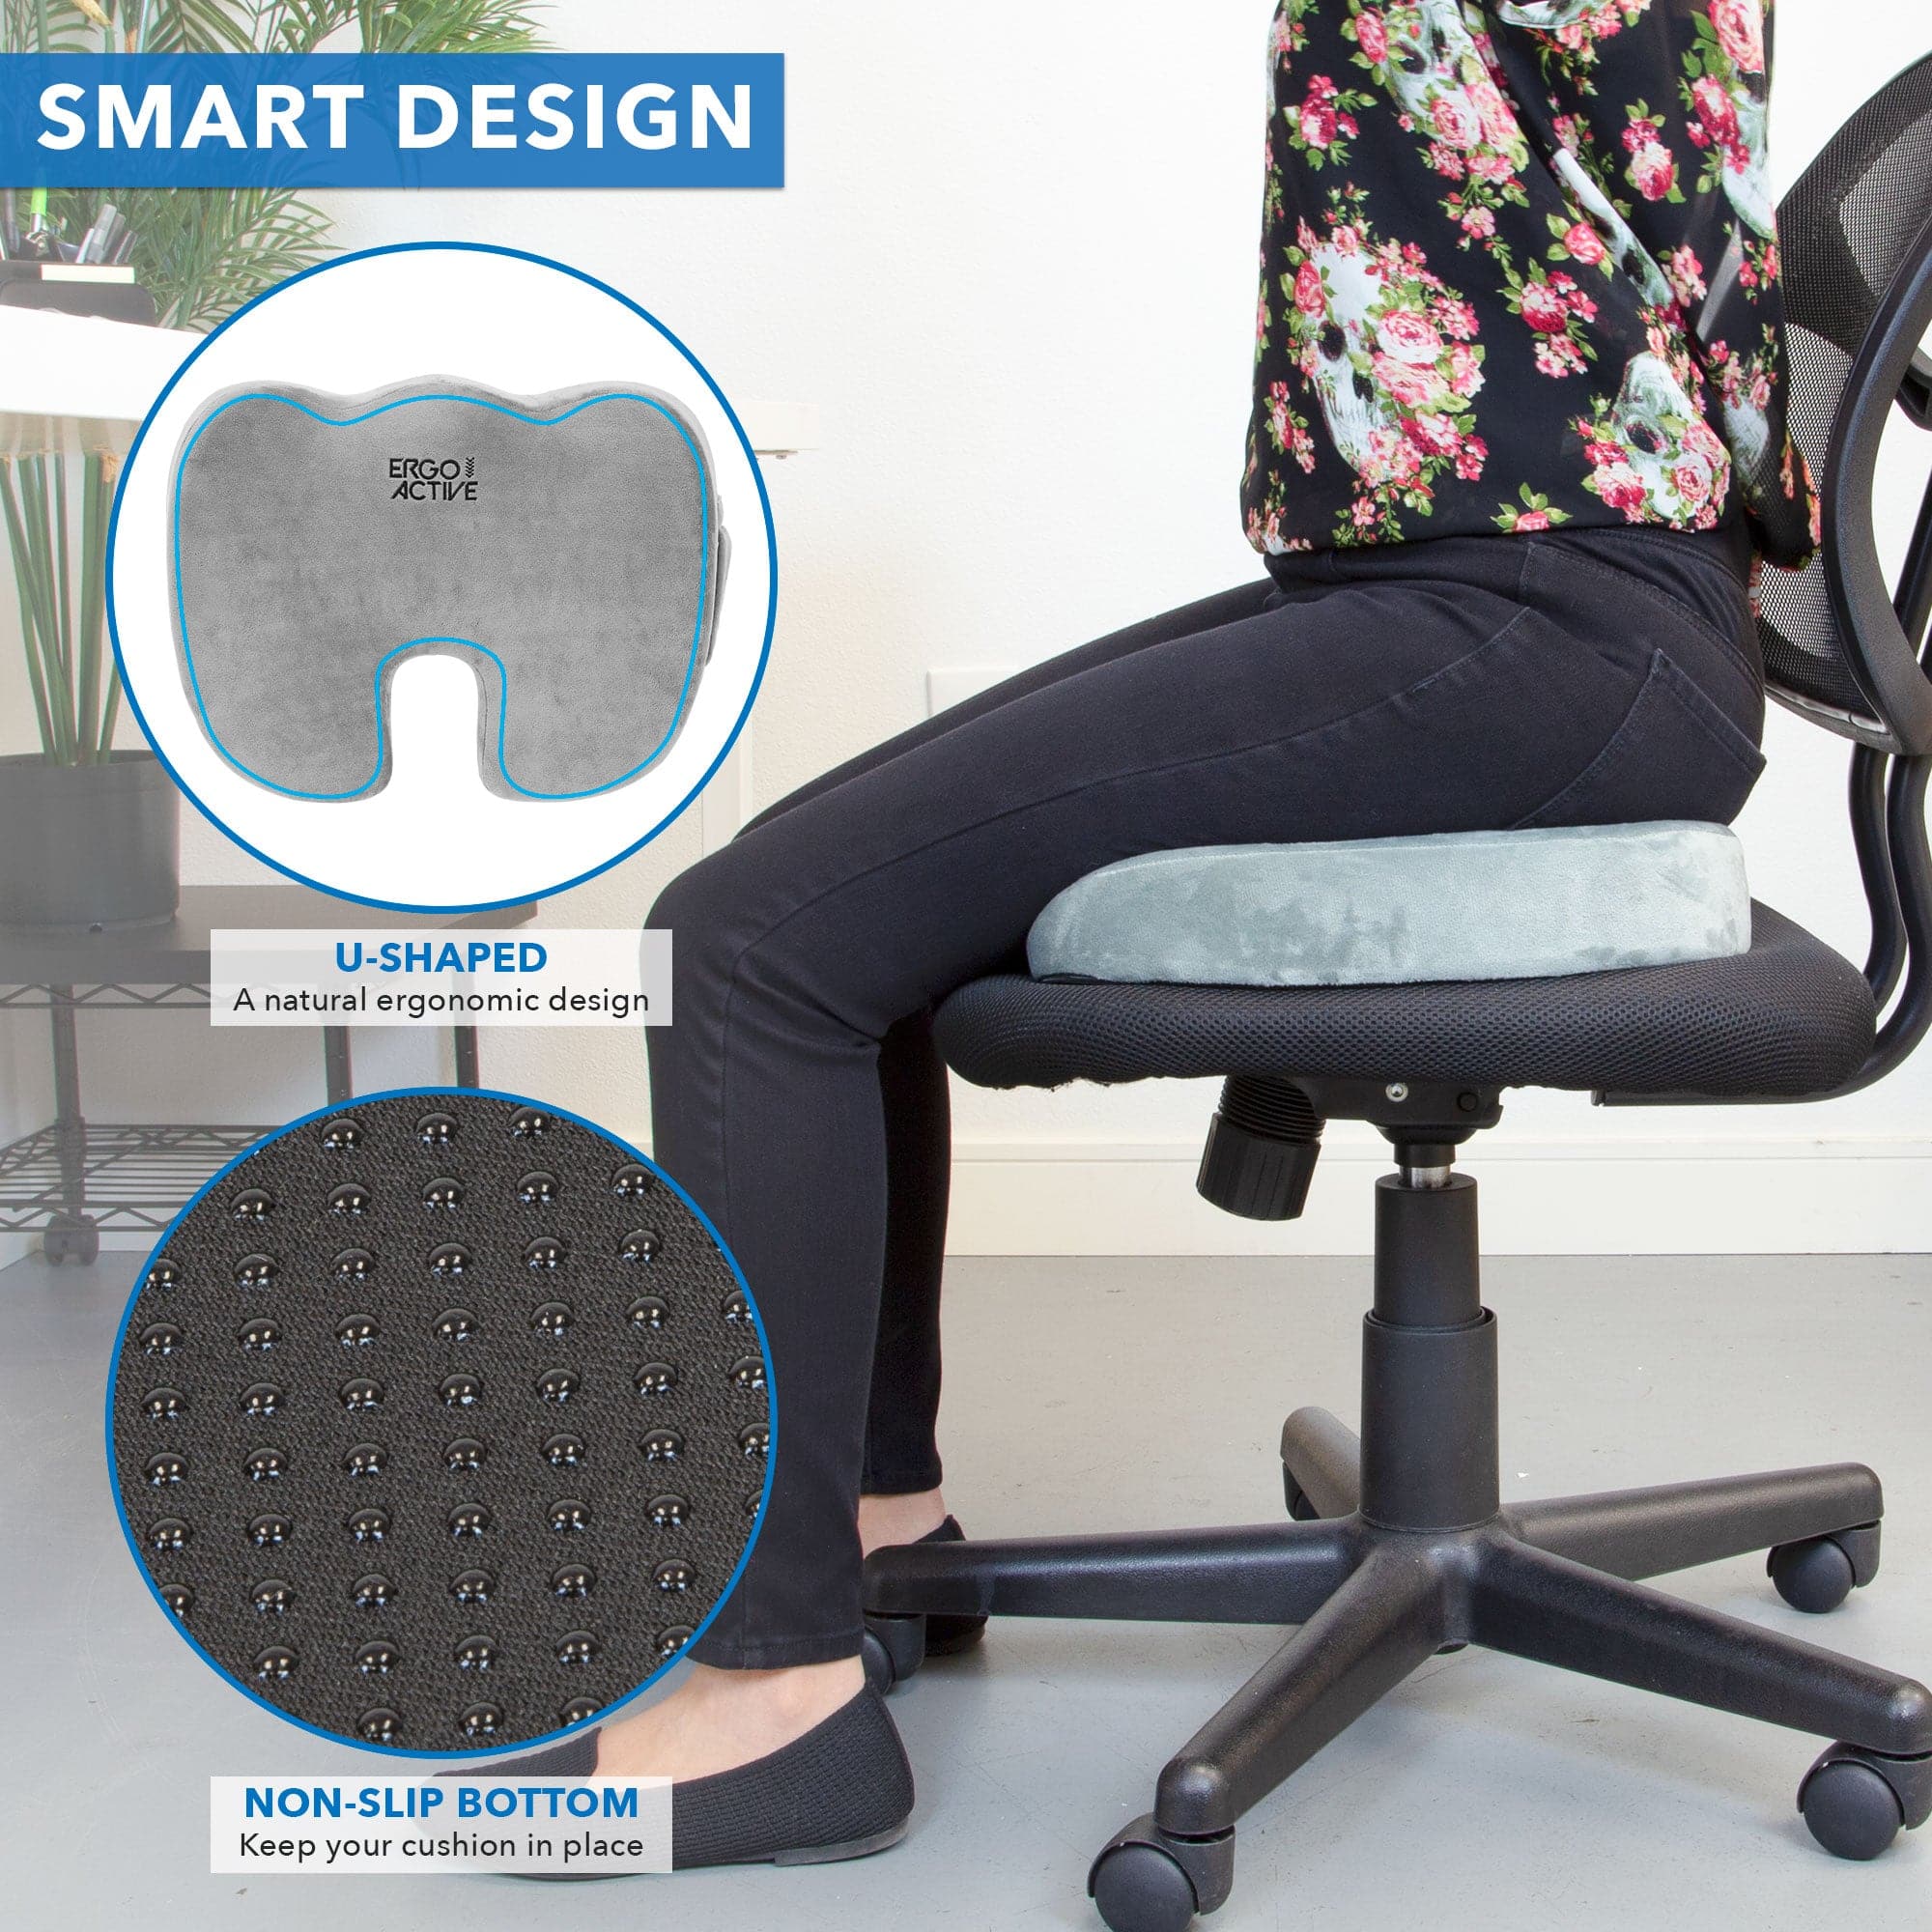 SWISS DRIVE CAR SEAT CUSHION WITH MEMORY FOAM AND COOLING GEL OFFICE HOME